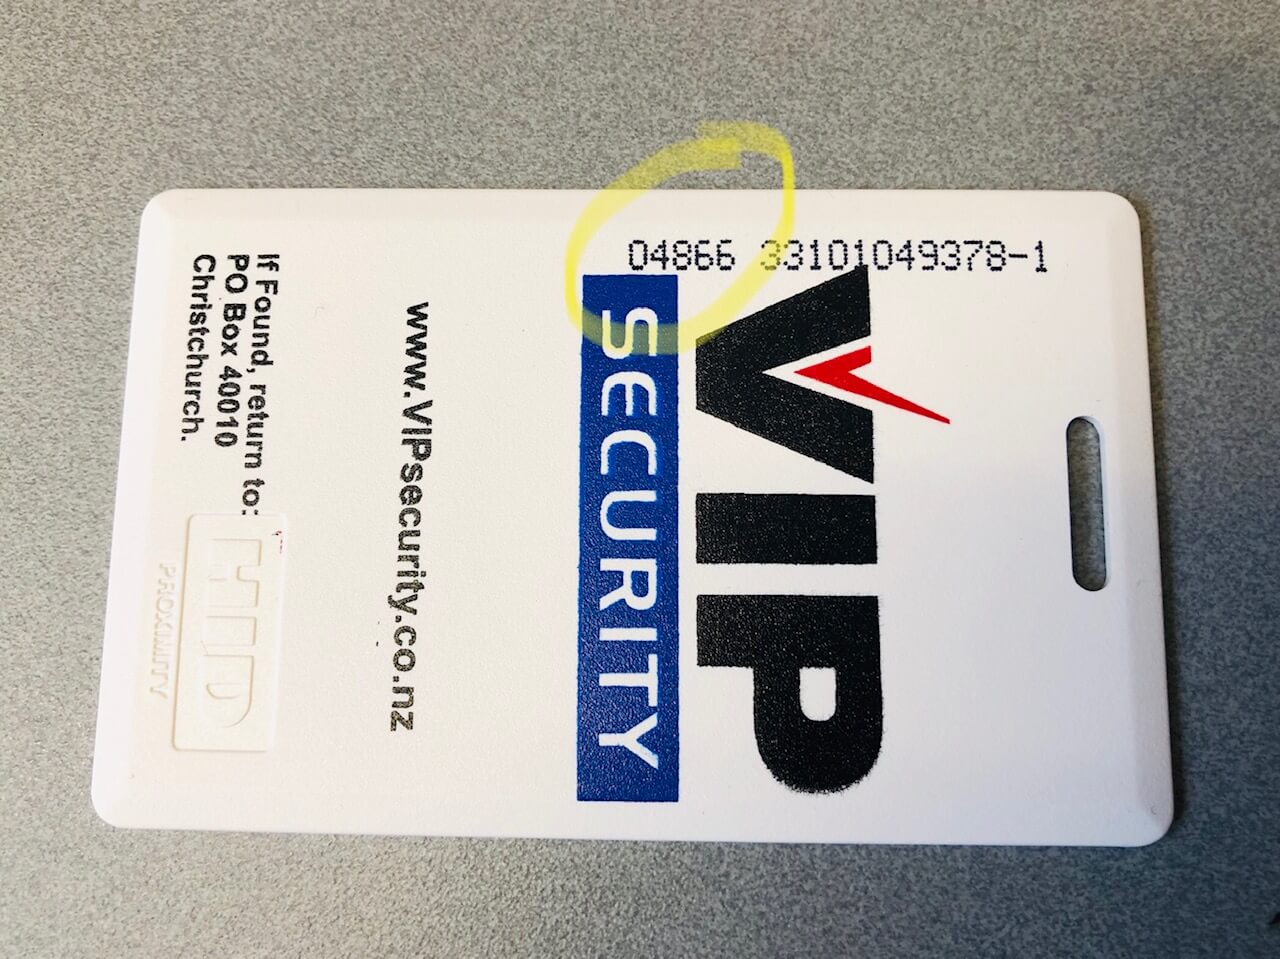 Secuorty Card